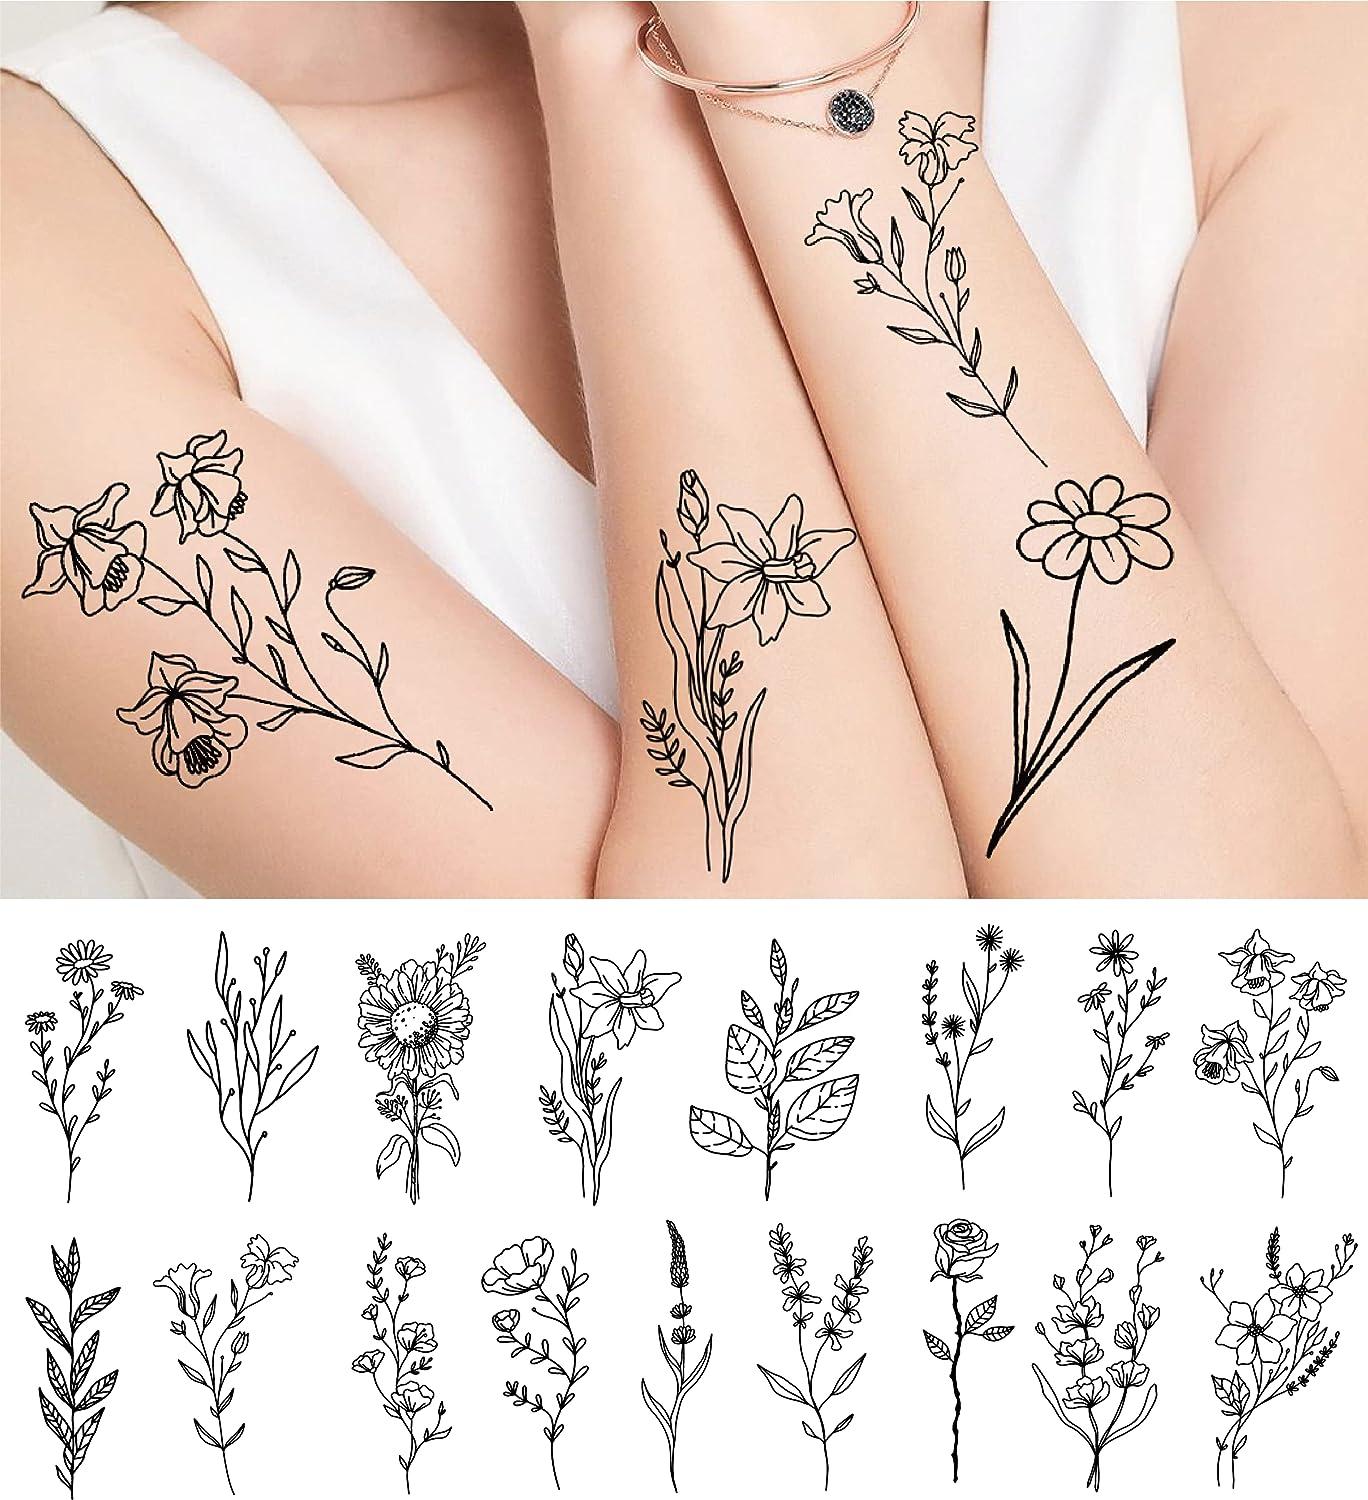 50 Small Tattoo Ideas Less is More : Colourful Little Flowers Tattoos I  Take You | Wedding Readings | Wedding Ideas | Wedding Dresses | Wedding  Theme